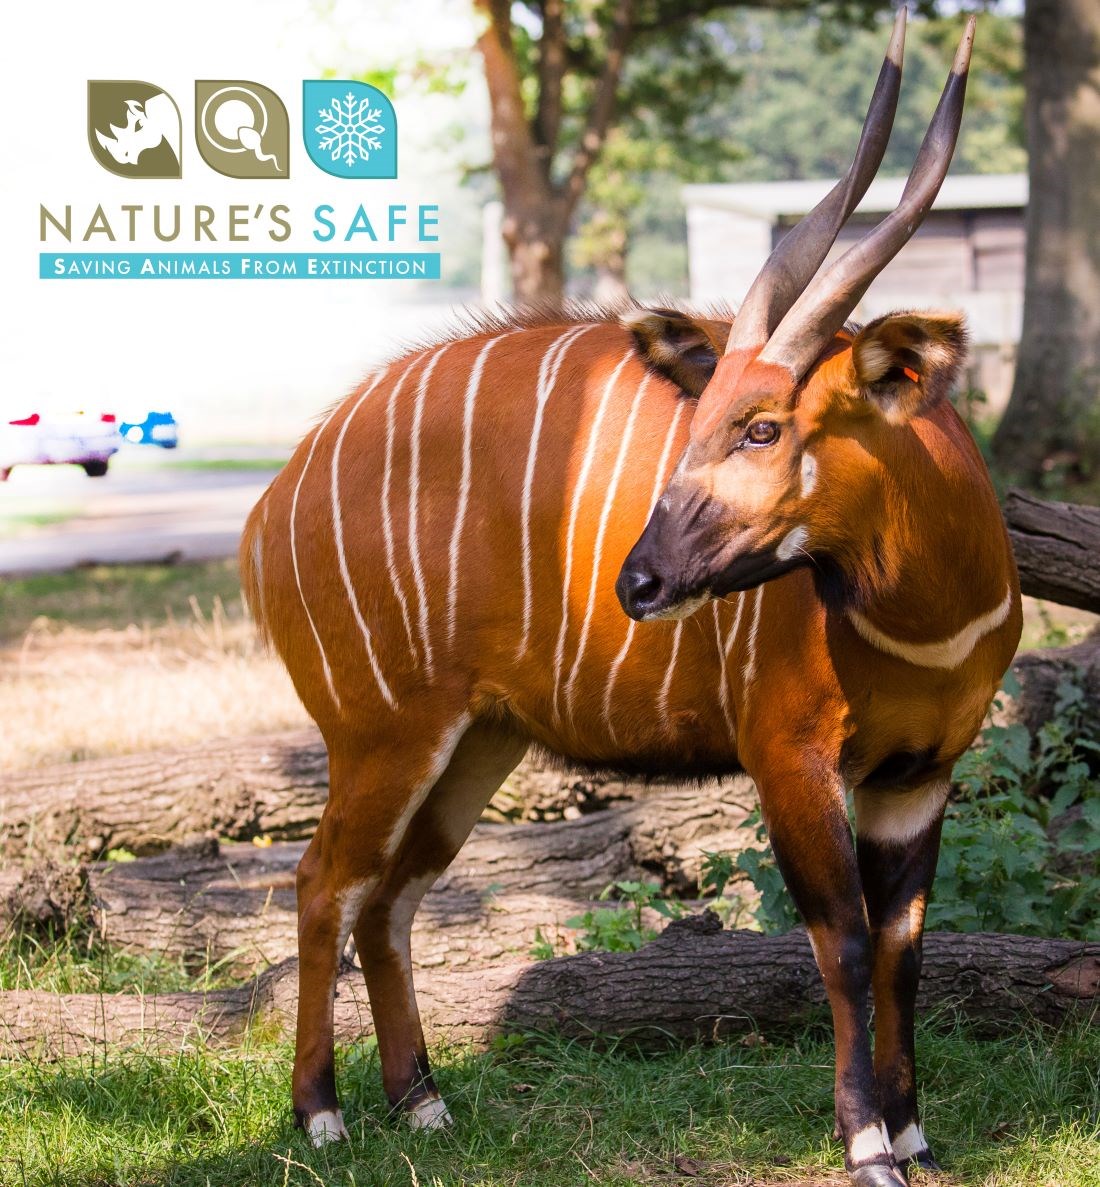 Bongo antelope in Road Safari forest enclosure with Nature's Safe Logo (Saving Animals From Extinction)